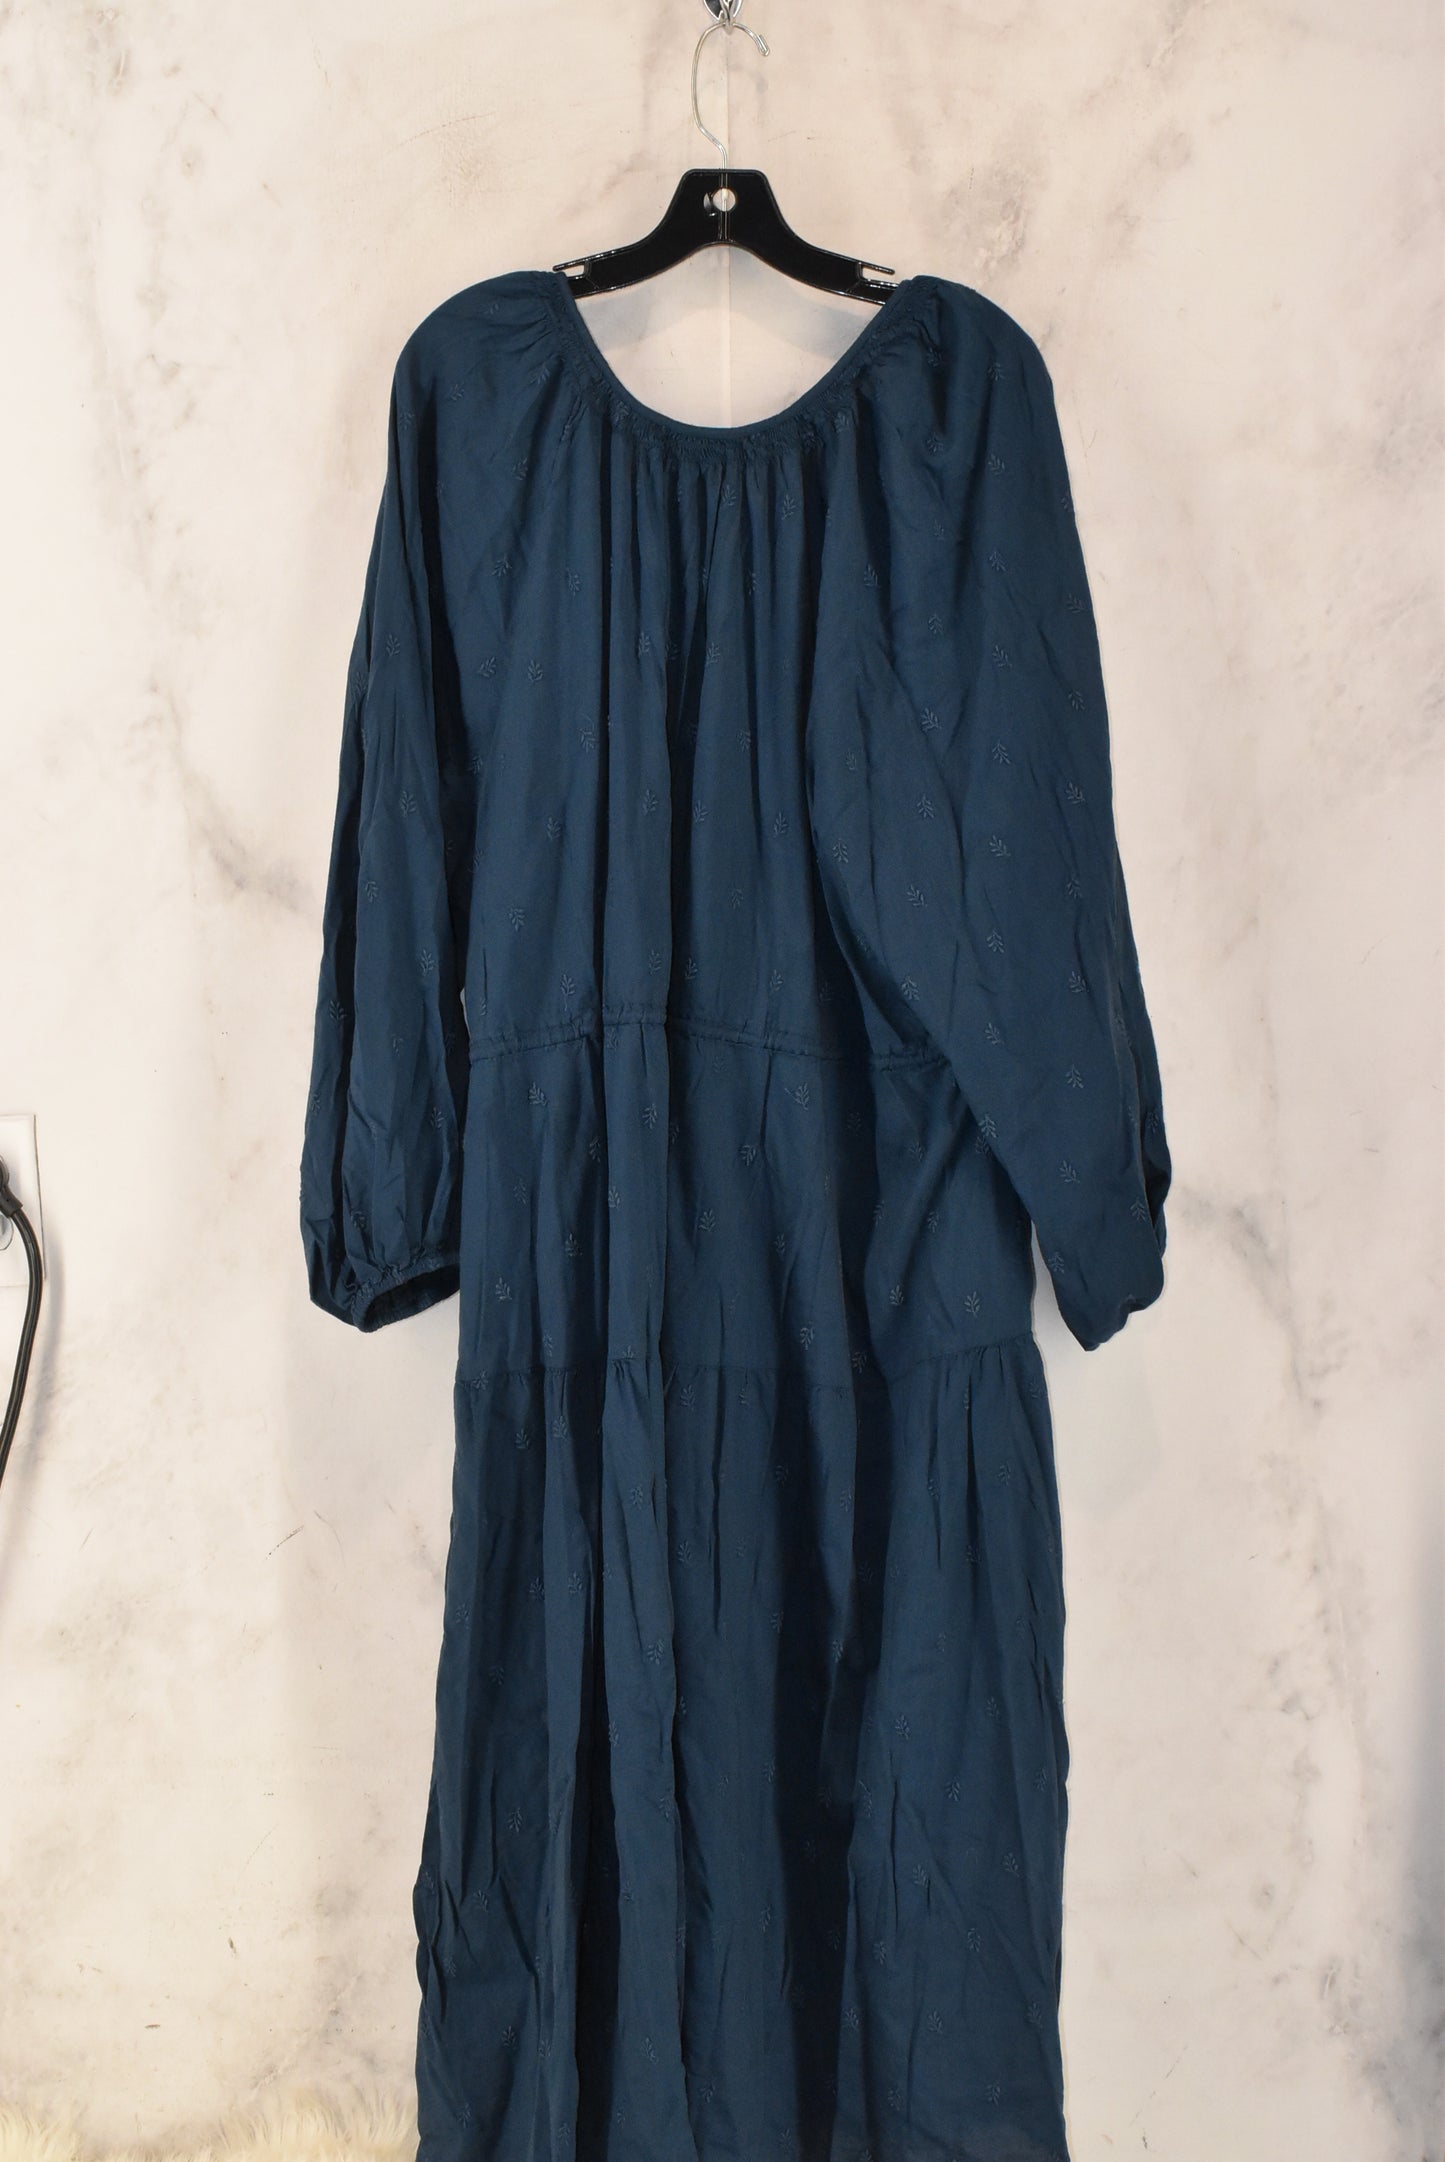 Dress Casual Maxi By Old Navy  Size: 3x